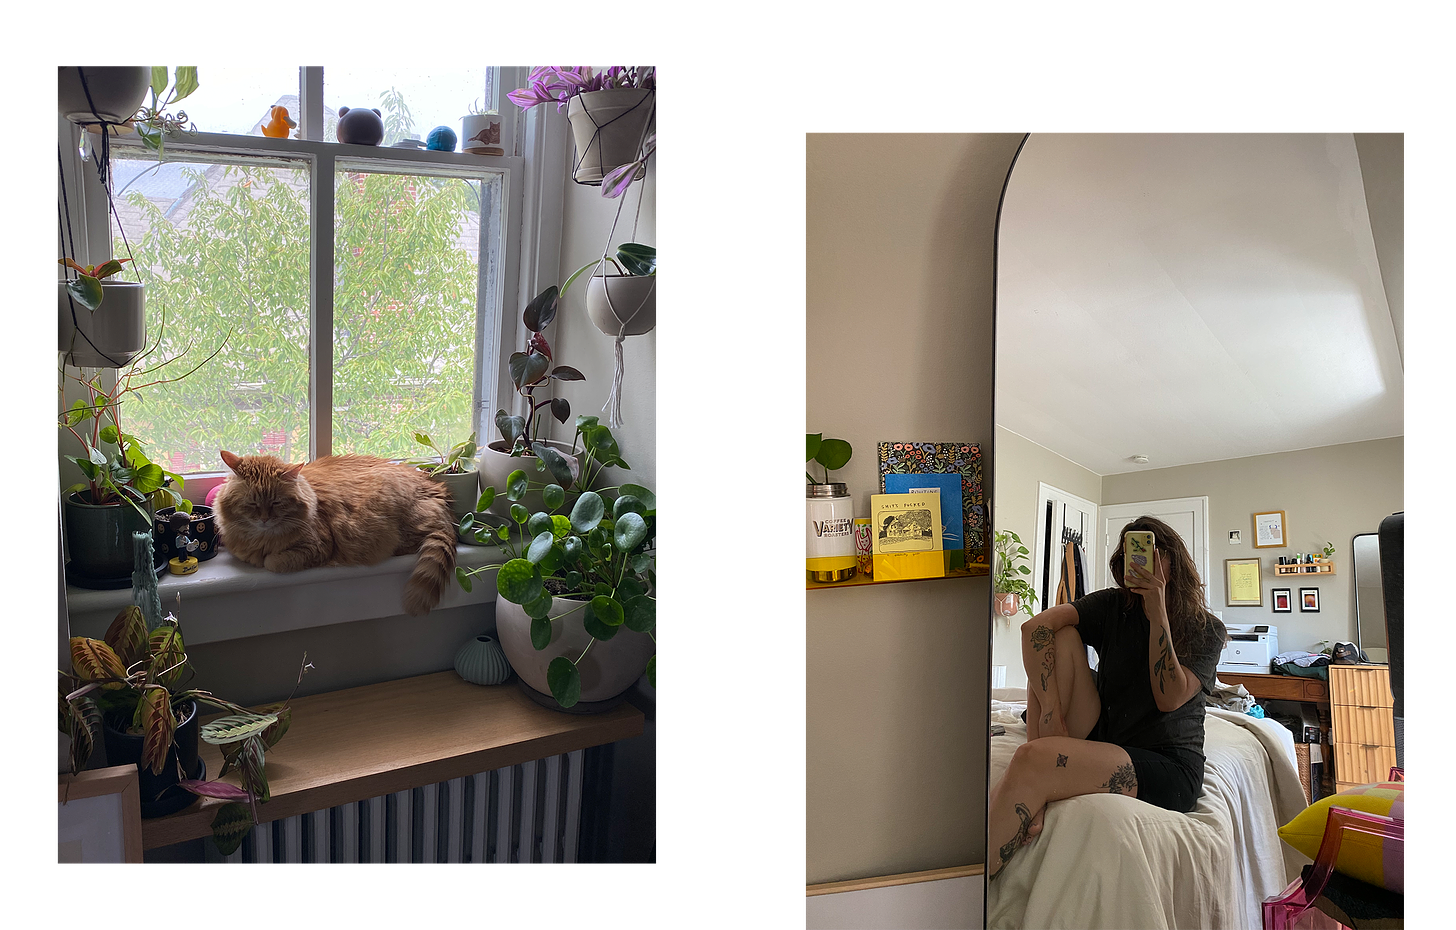 two photographs set asymmetrically next to one another. on the left, an orange cat sits in a window with plants surrounding her, sitting on the edges of the windowsill and hanging from the walls around the window. on the right, a mirror selfie of the author in their bedroom. their yellow iphone is covering their face and they're sitting on their bed. you can see tattoos on their arms and legs.